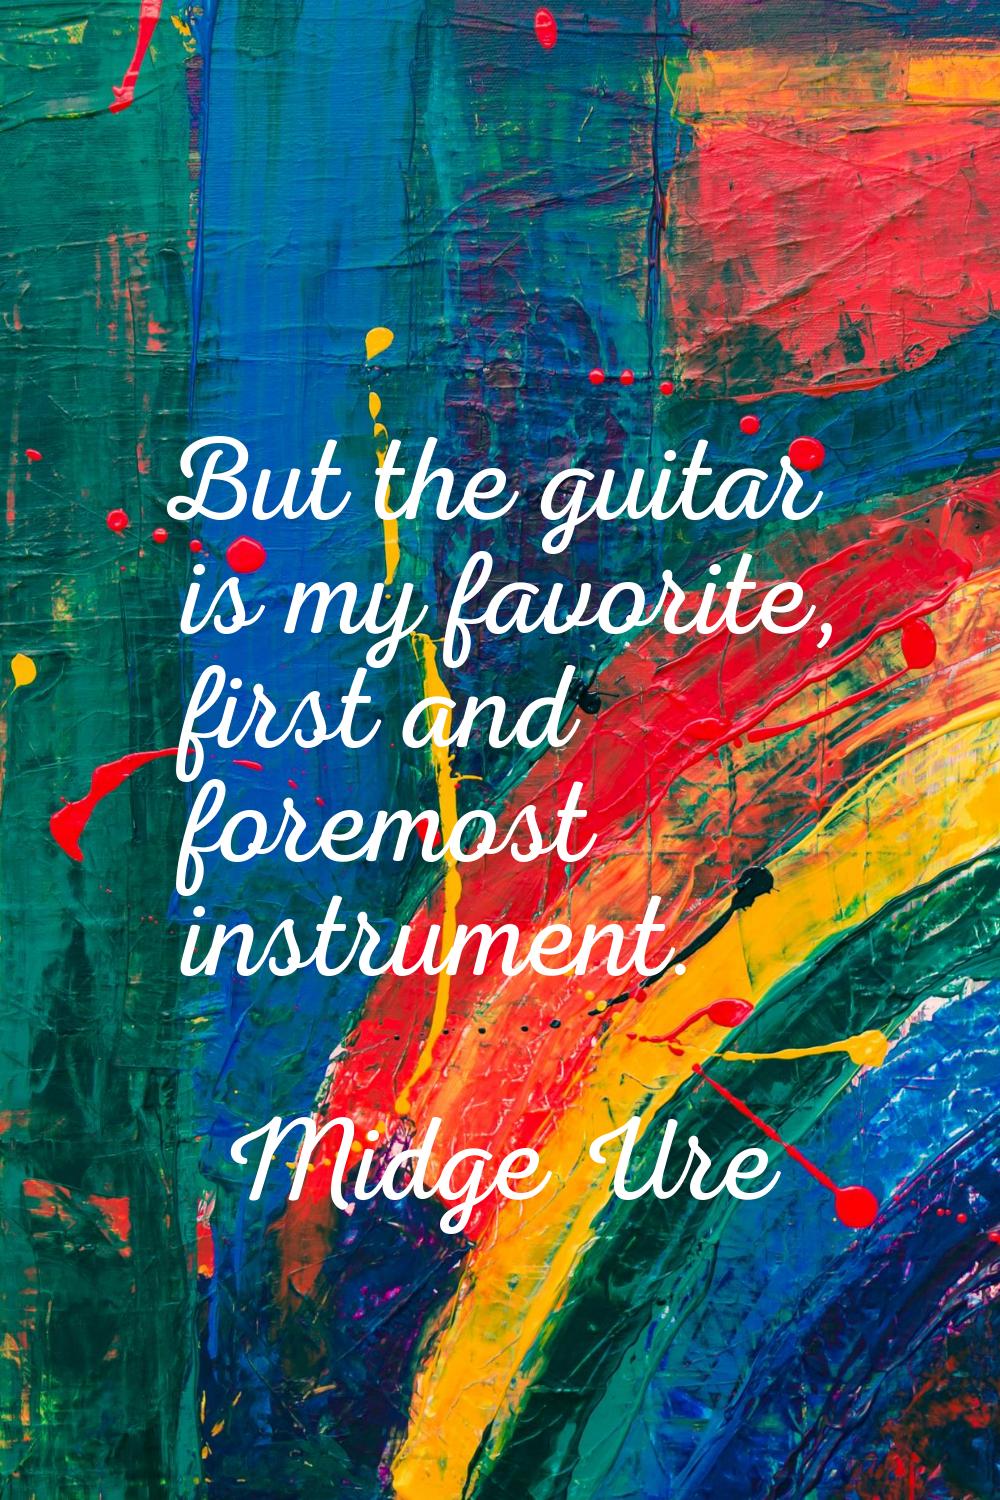 But the guitar is my favorite, first and foremost instrument.